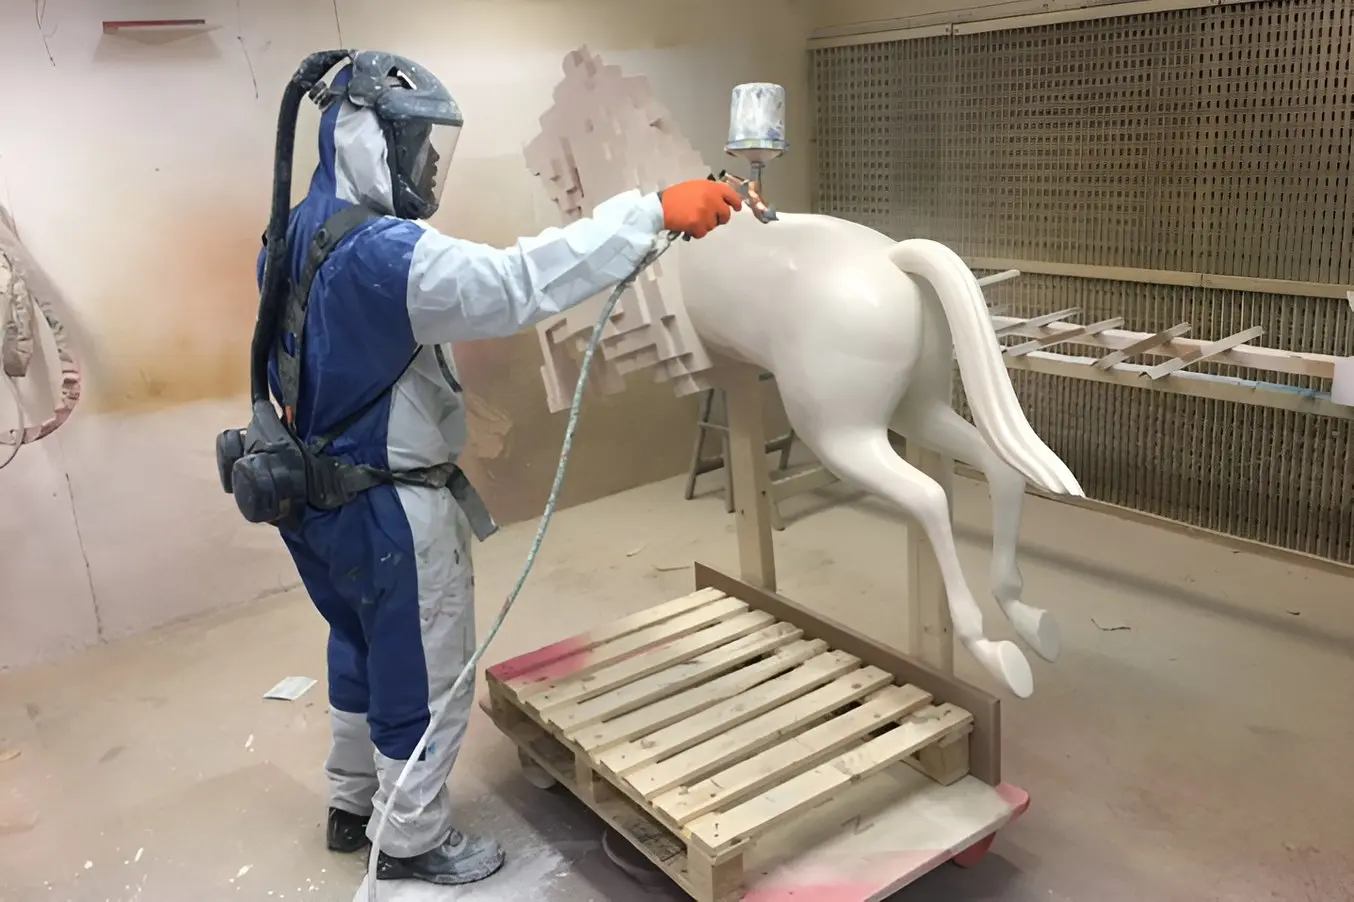 A 3D printed horse getting spraypainted